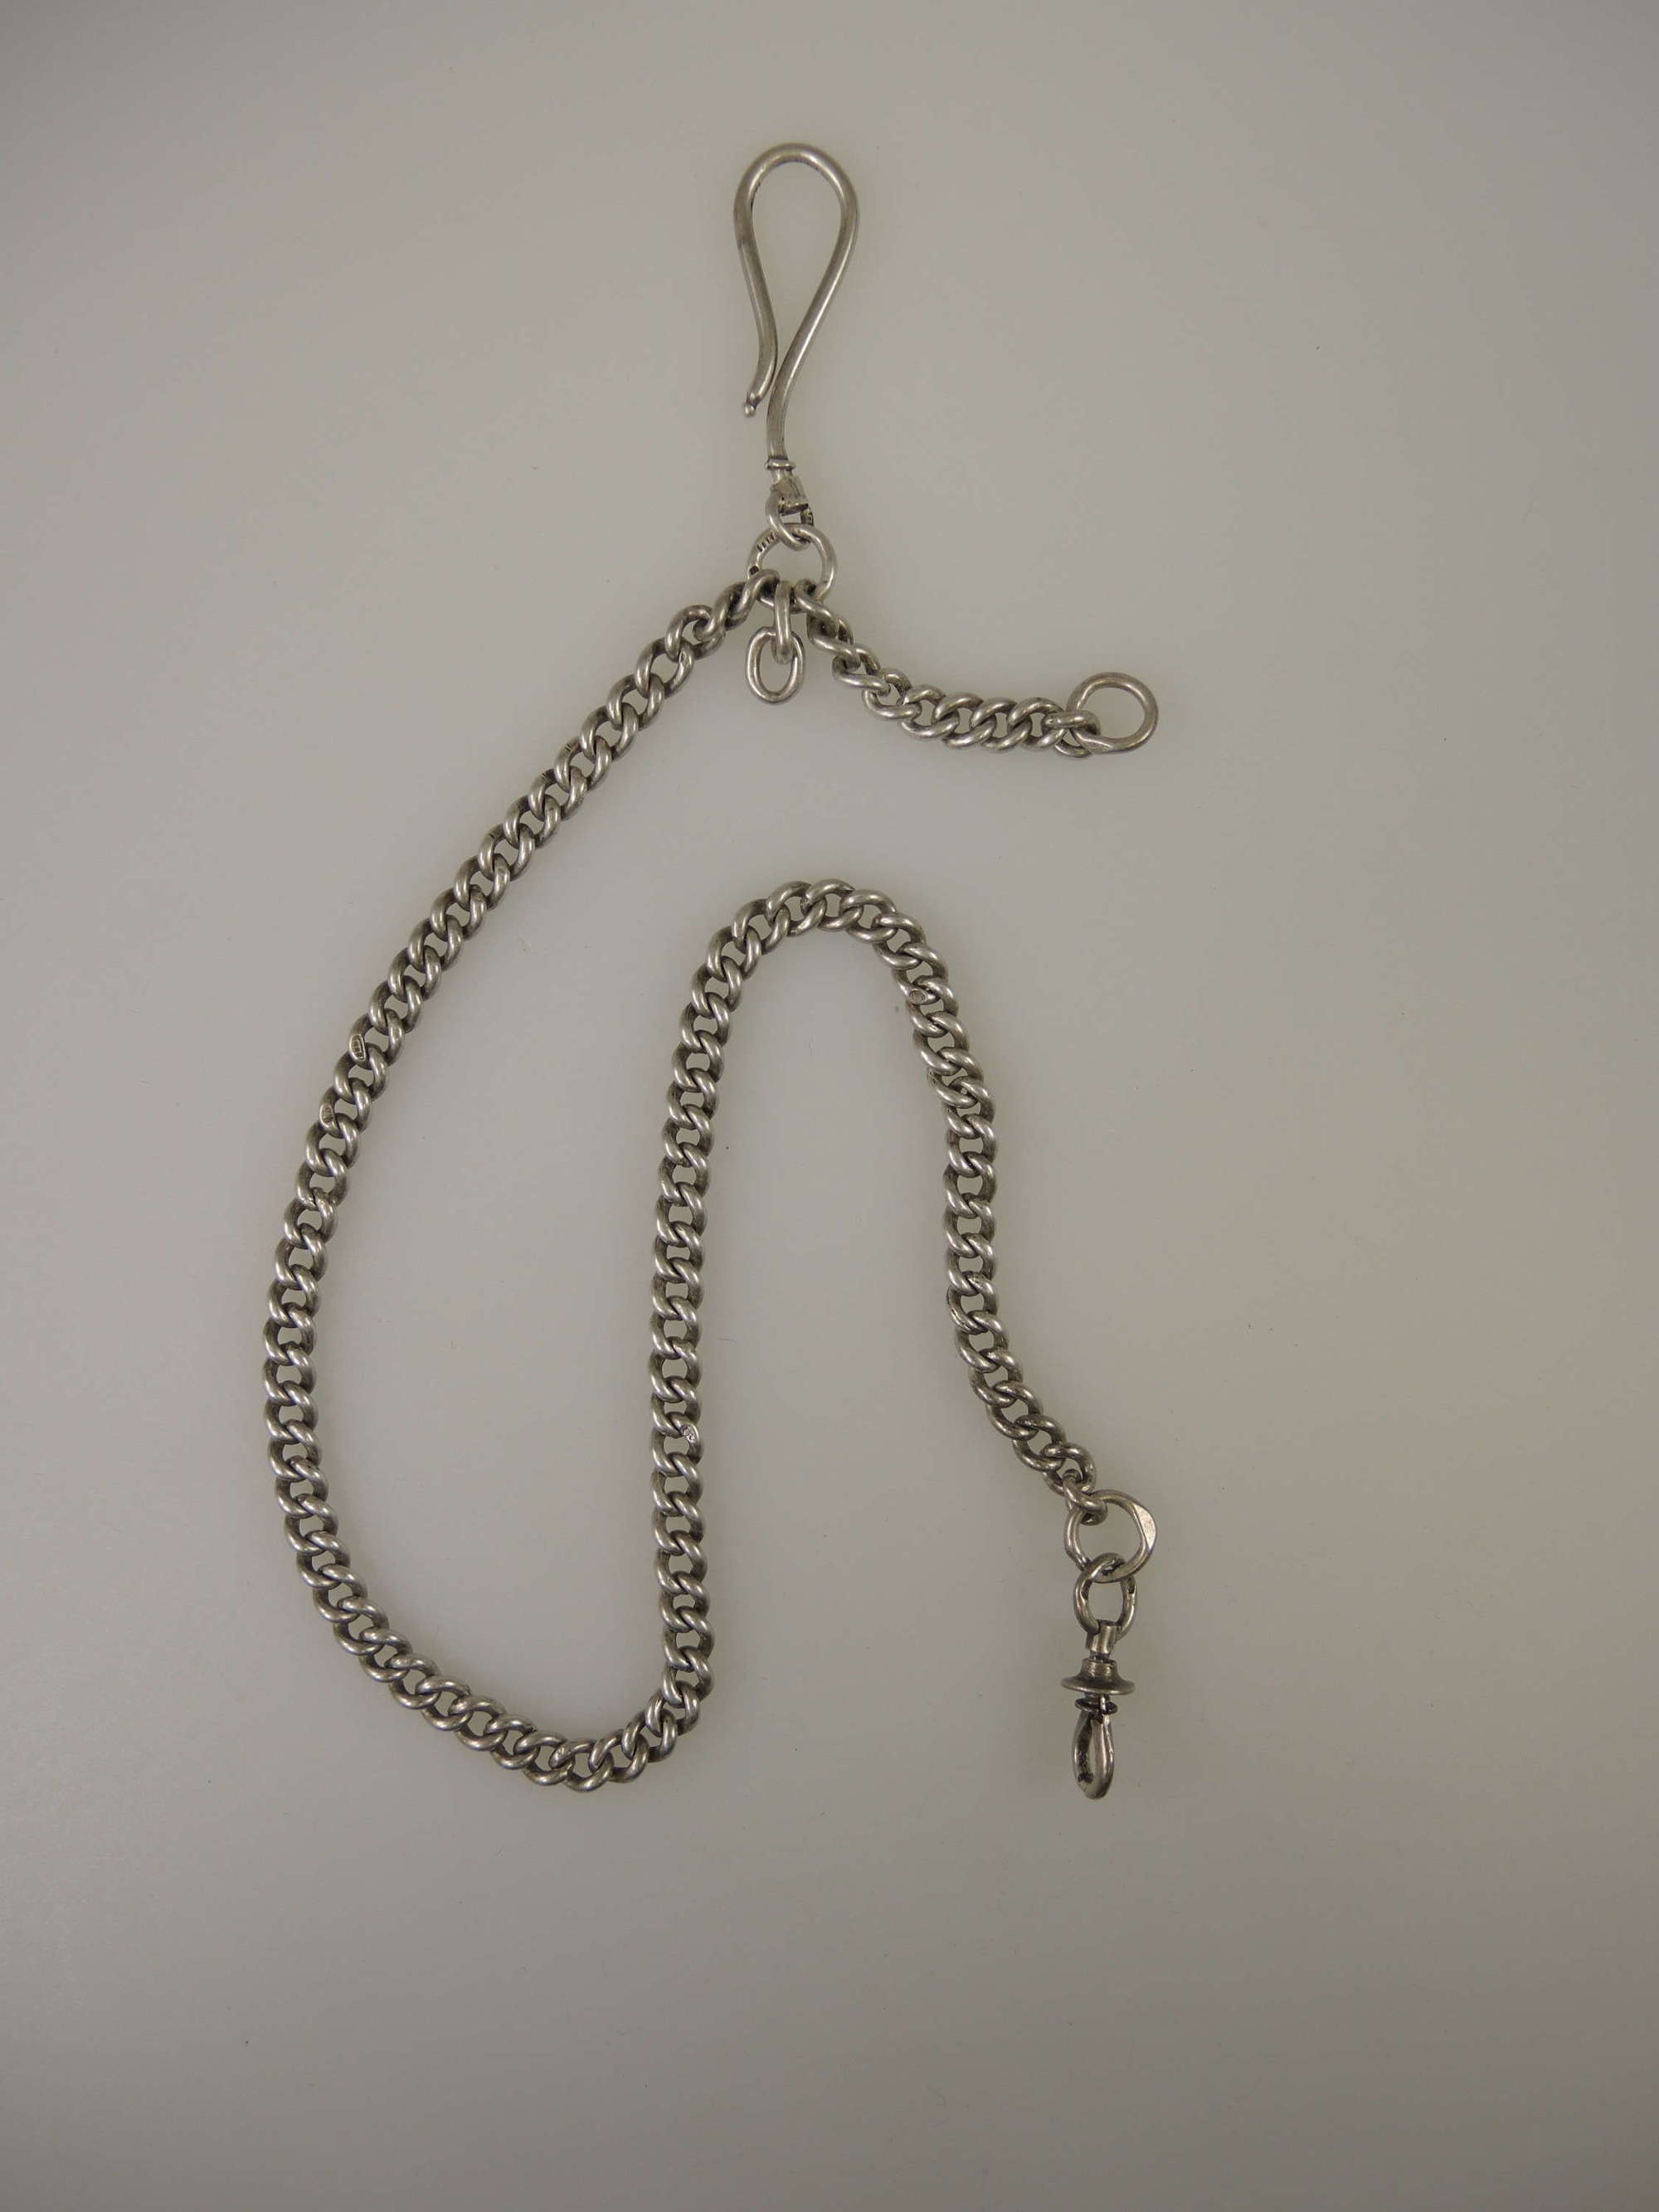 Good quality Victorian silver watch chain c1890